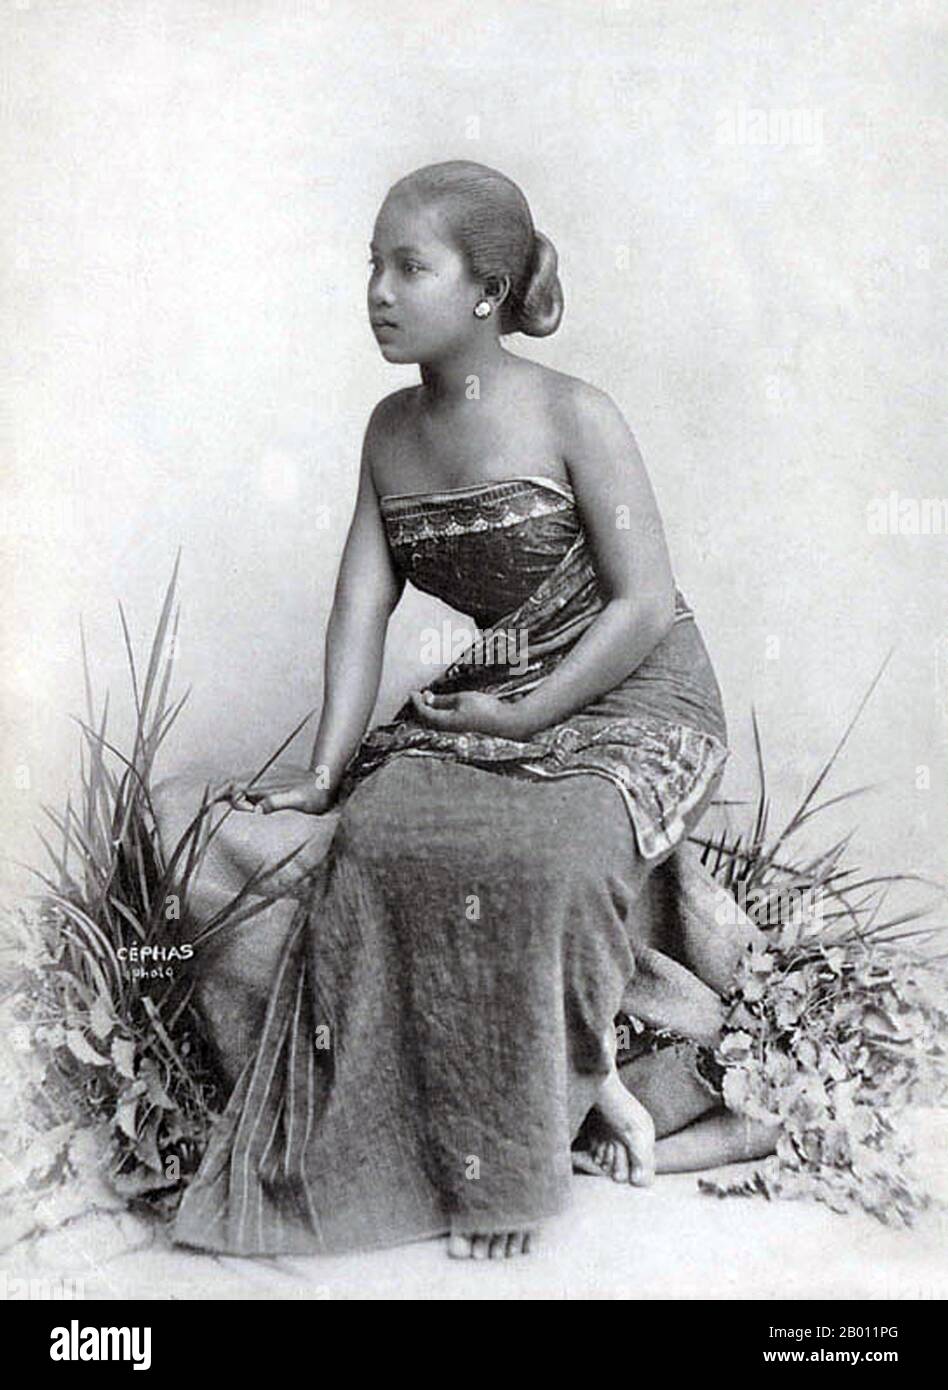 Indonesia: Javanese woman posing in a sarong, photo by Kassian Cephas (1846-1912), late 19th century. Stock Photo